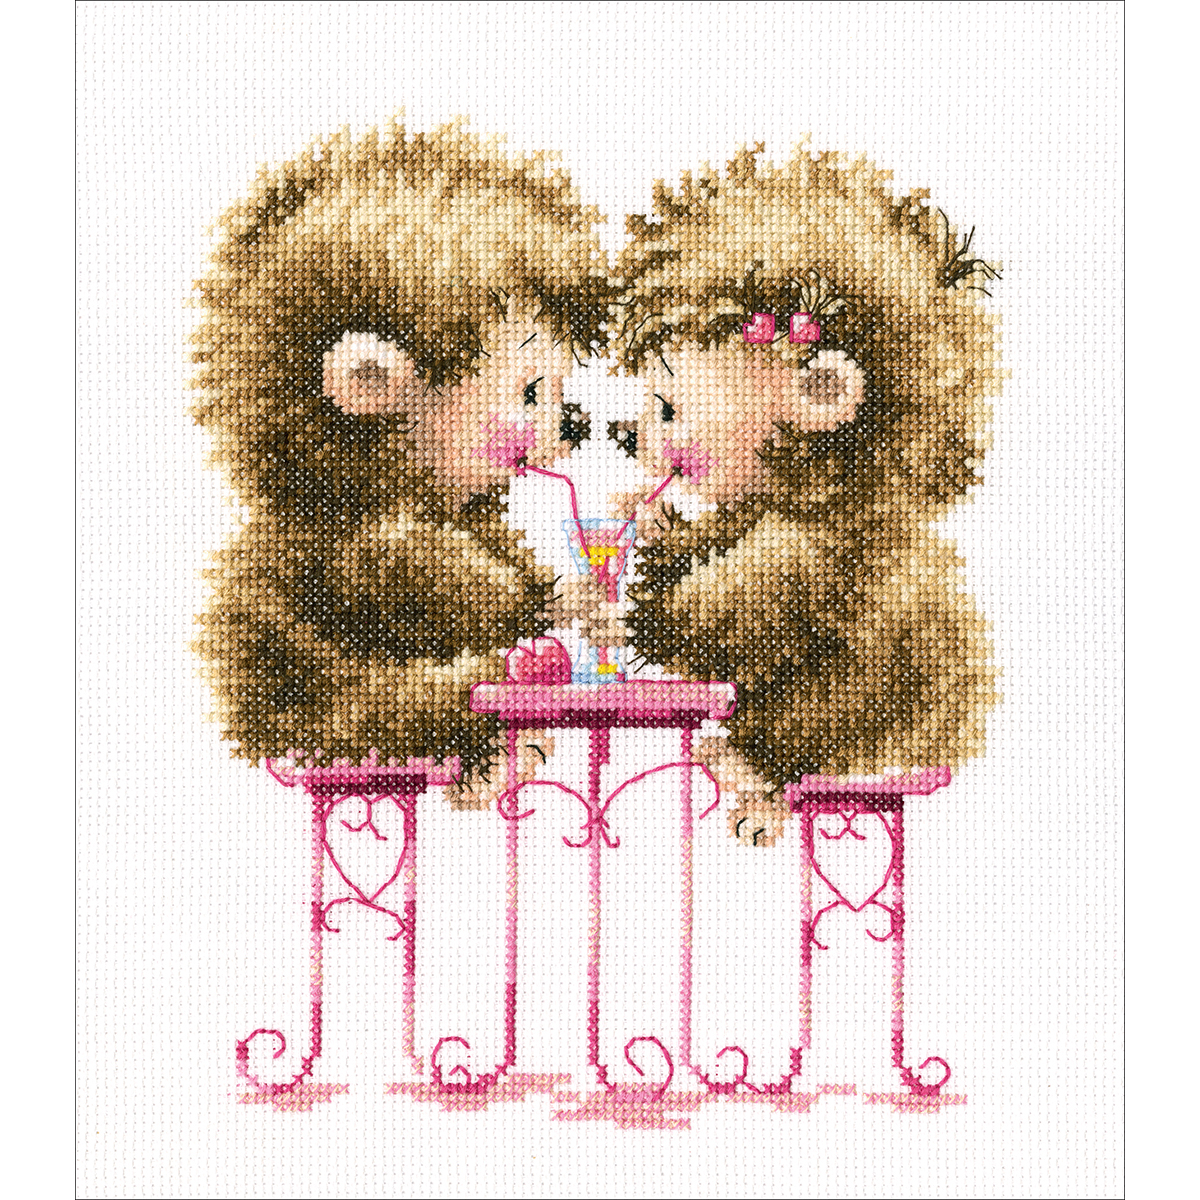 Mouse in Raspberry Bush Counted Cross Stitch Kit